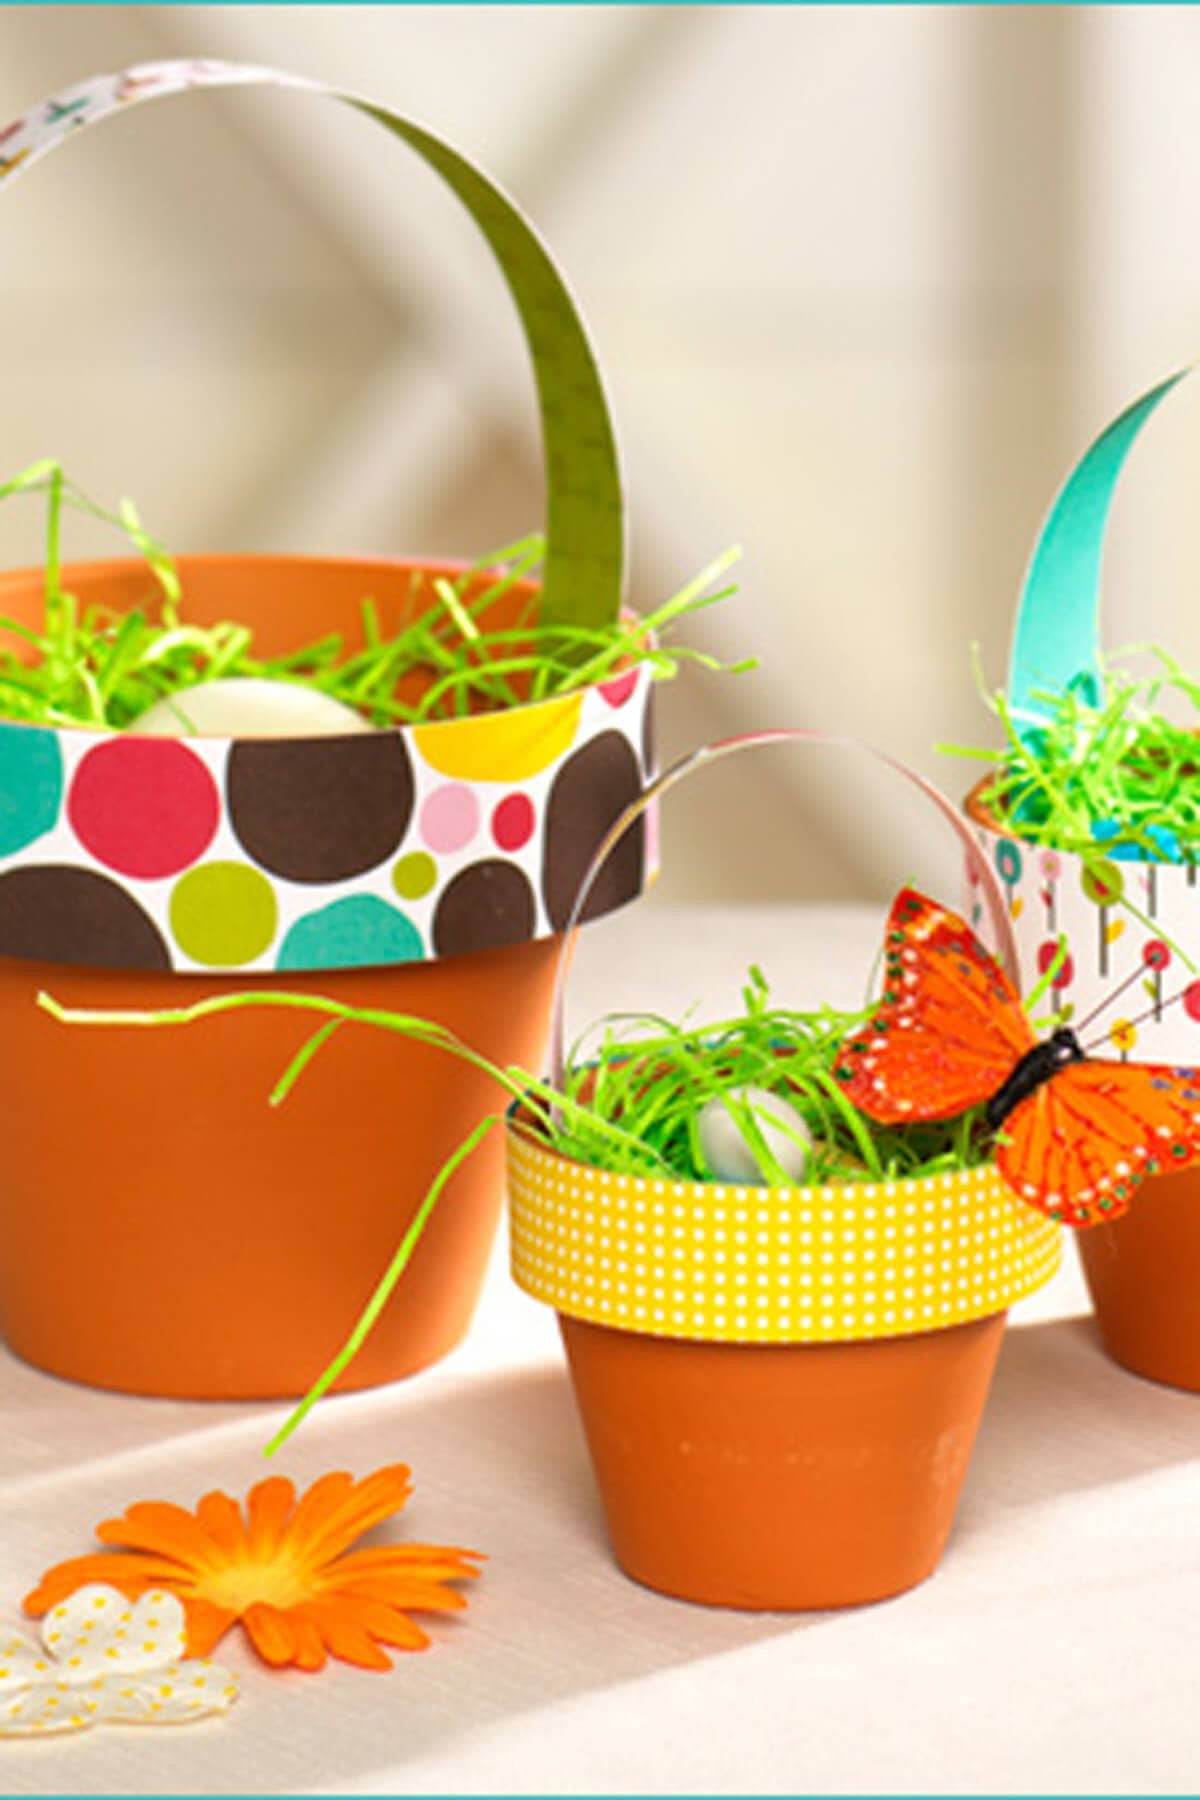 Diy Easter Gifts Lovely 25 Creative Diy Easter Basket Ideas that Can Be Done In